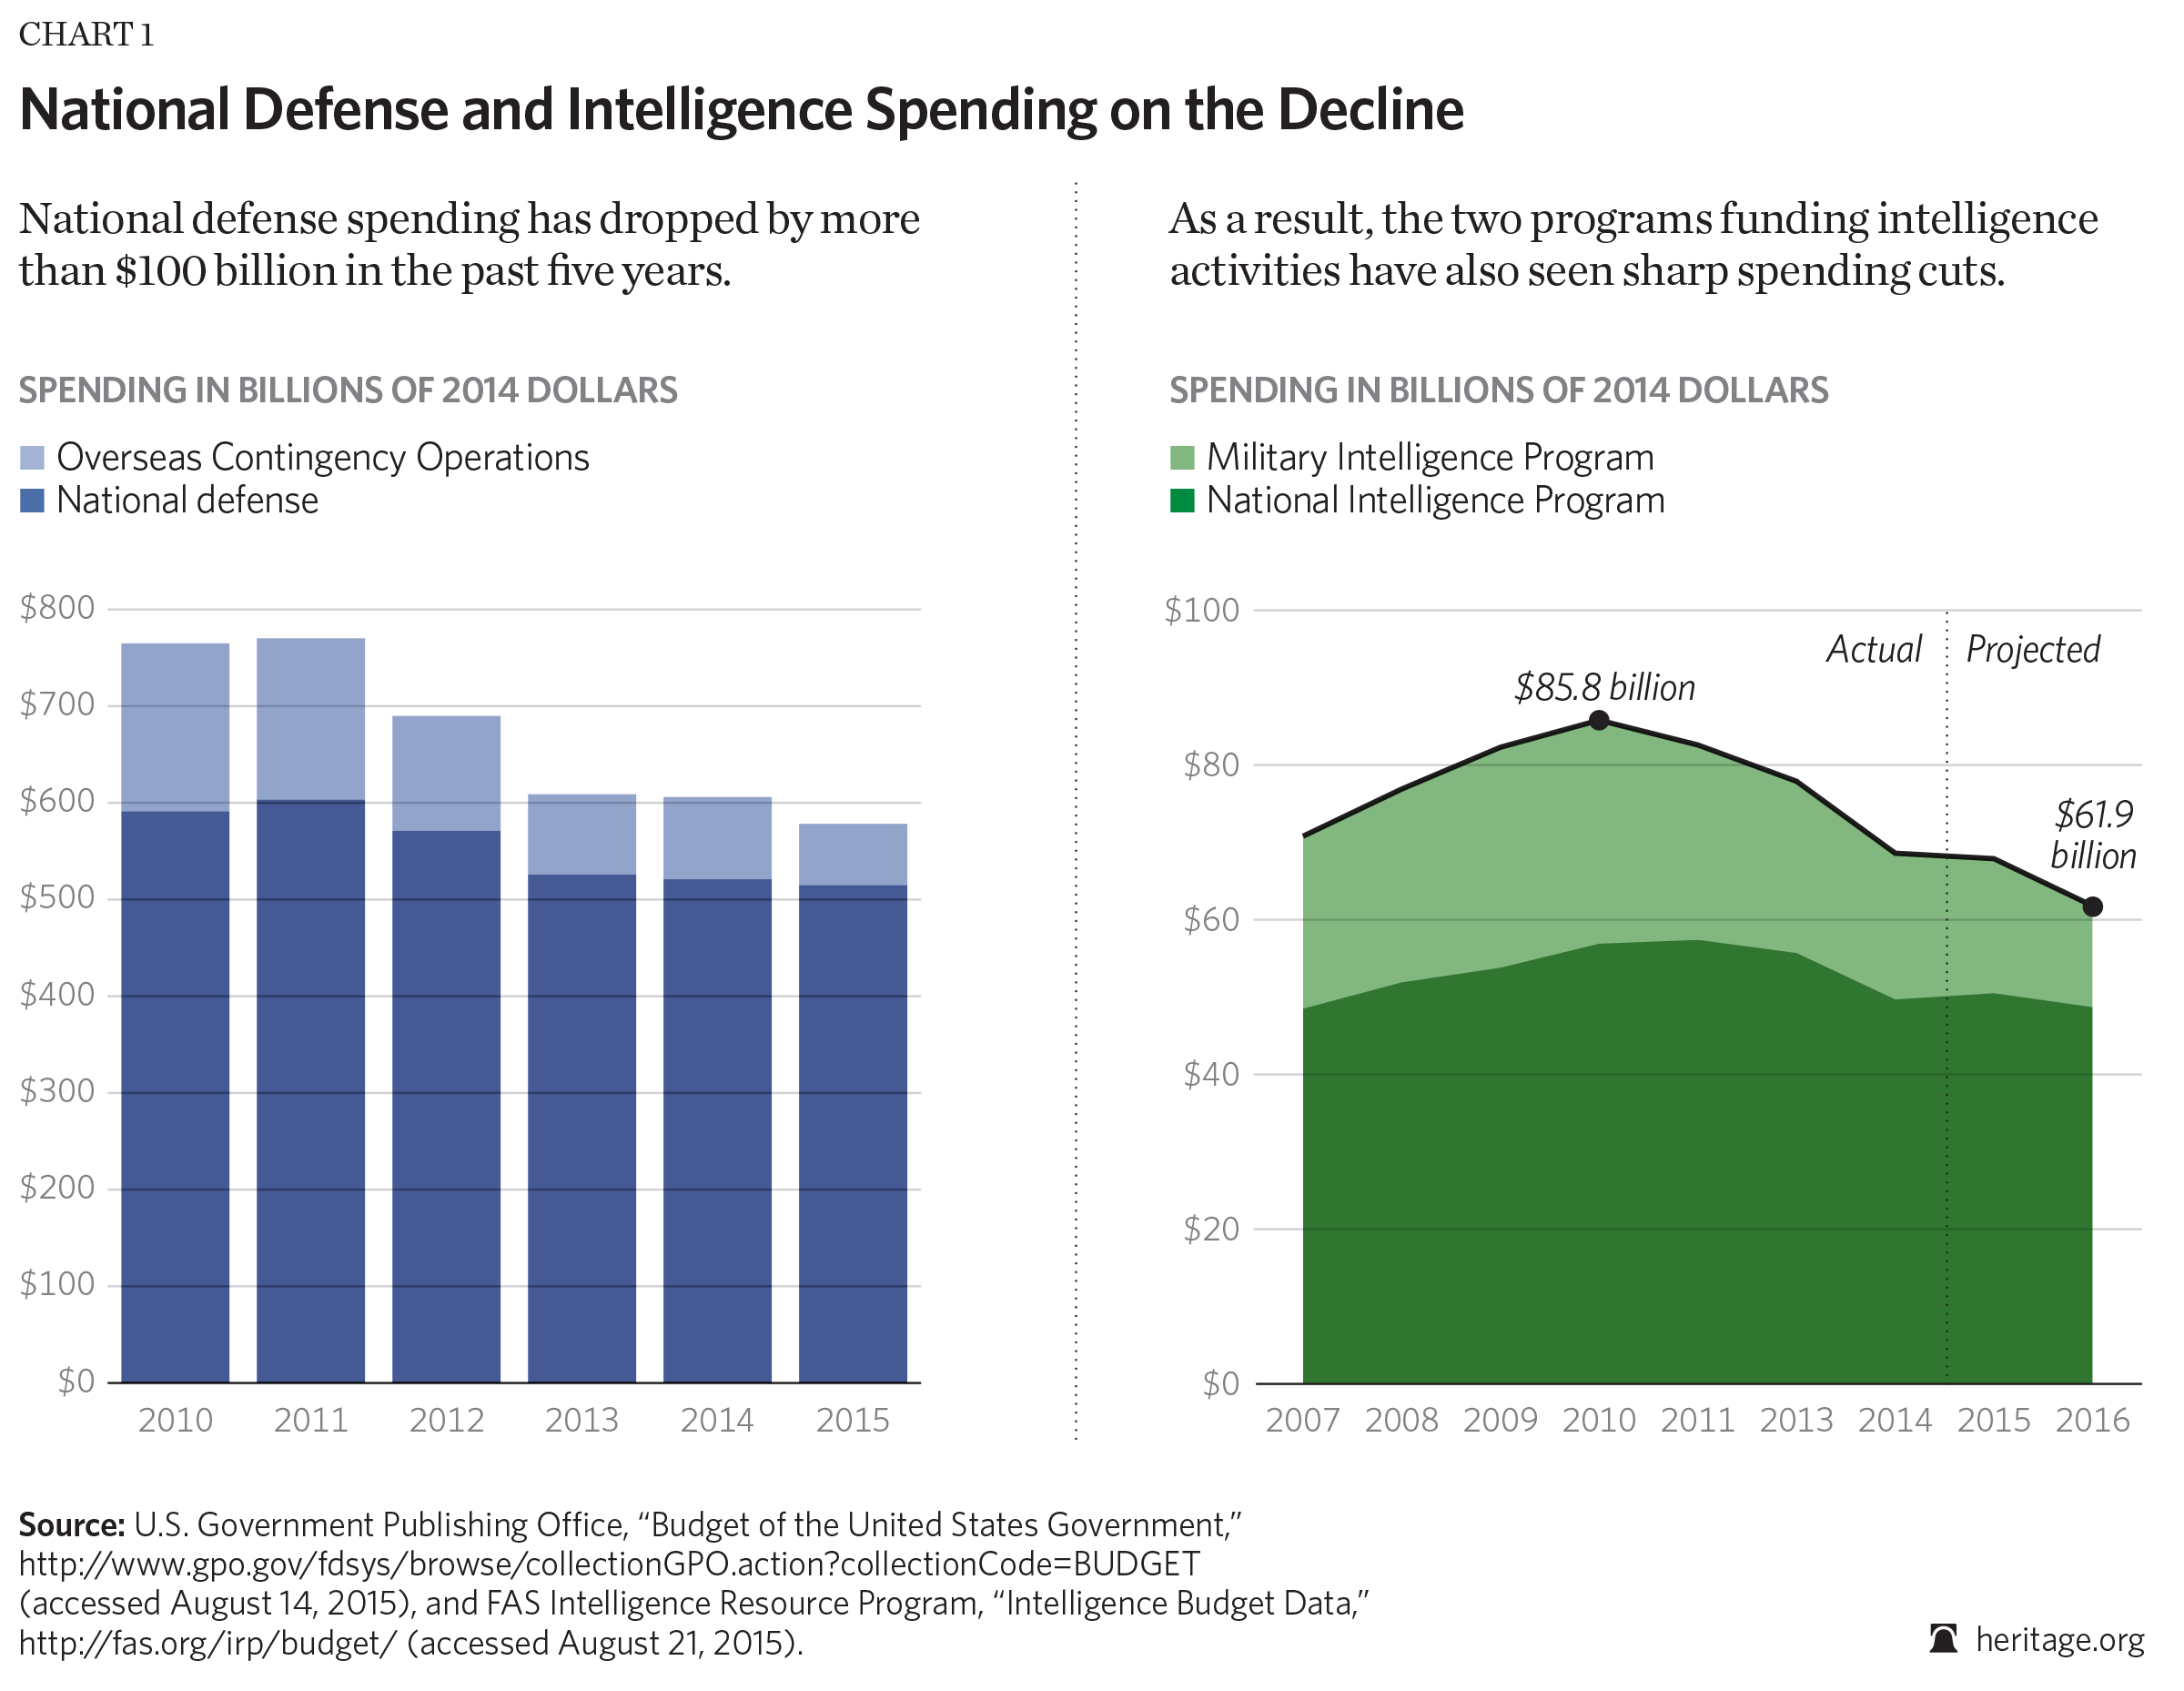 MS-2016-intelligence-and-national-defense-chart.png 